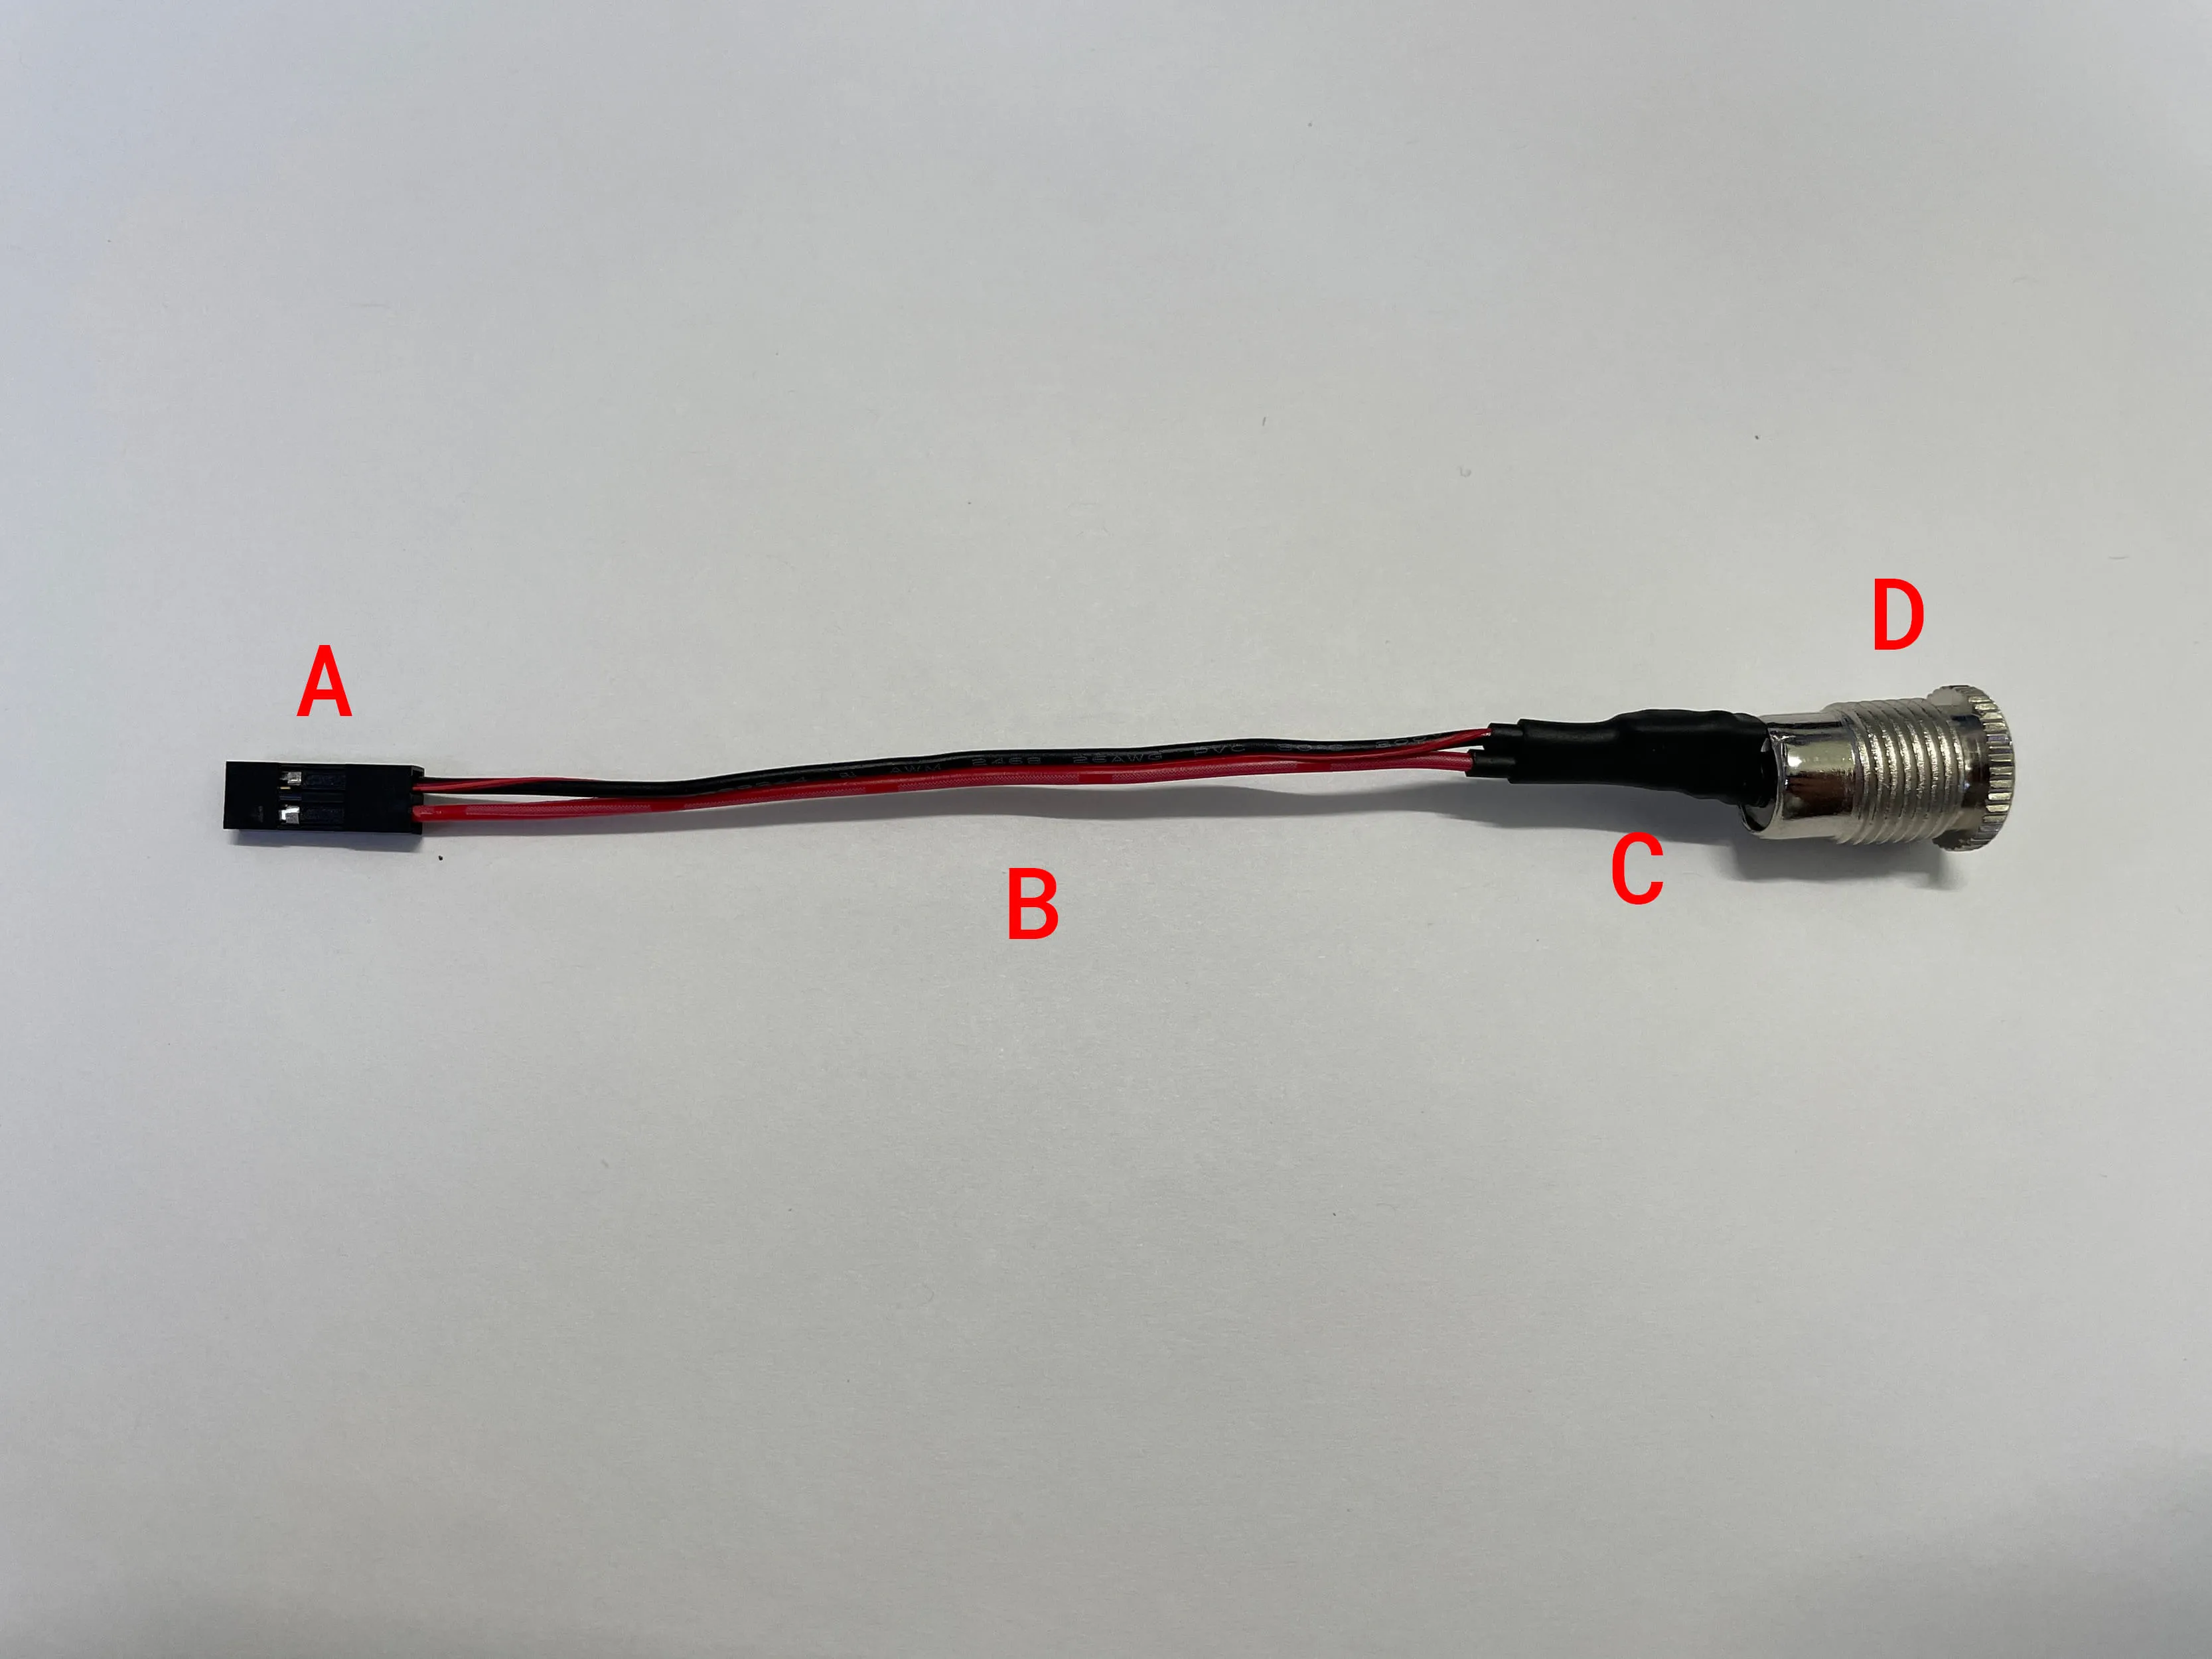 Wiring between Raspberry Pi 4 dupont connector and female barrel connector